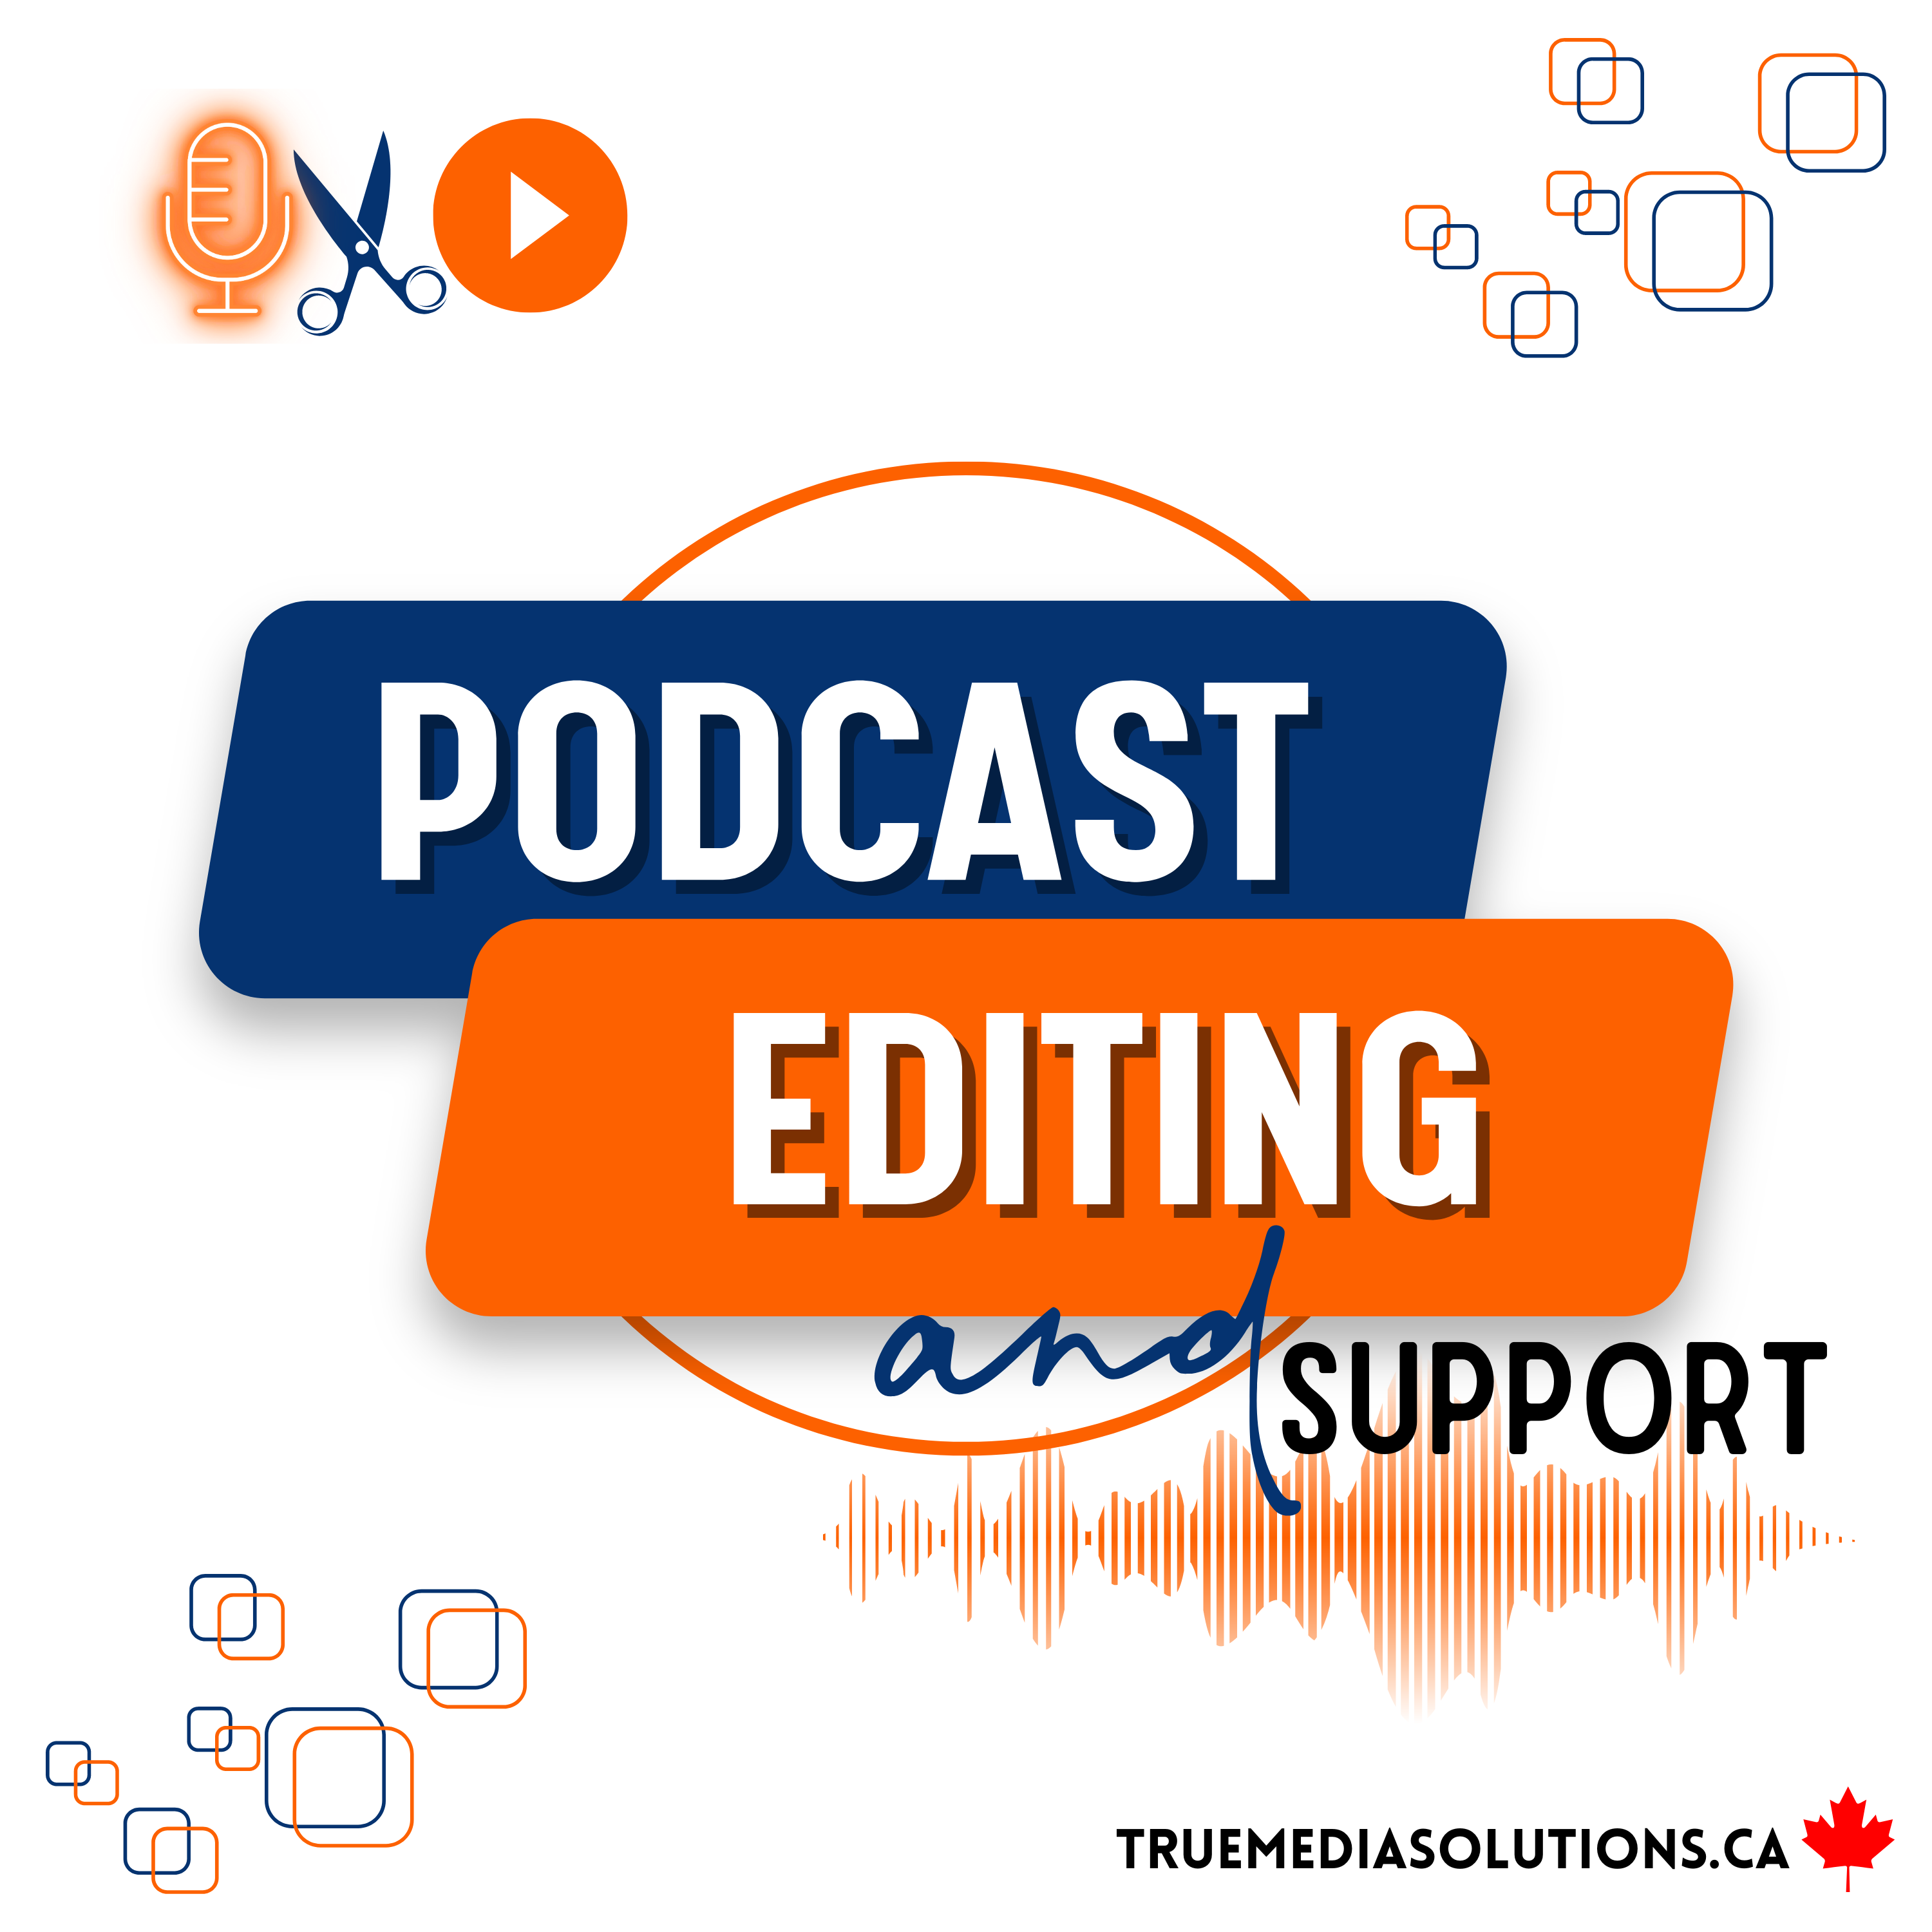 a podcast for anyone looking for or wanting to become a podcast editor and support person